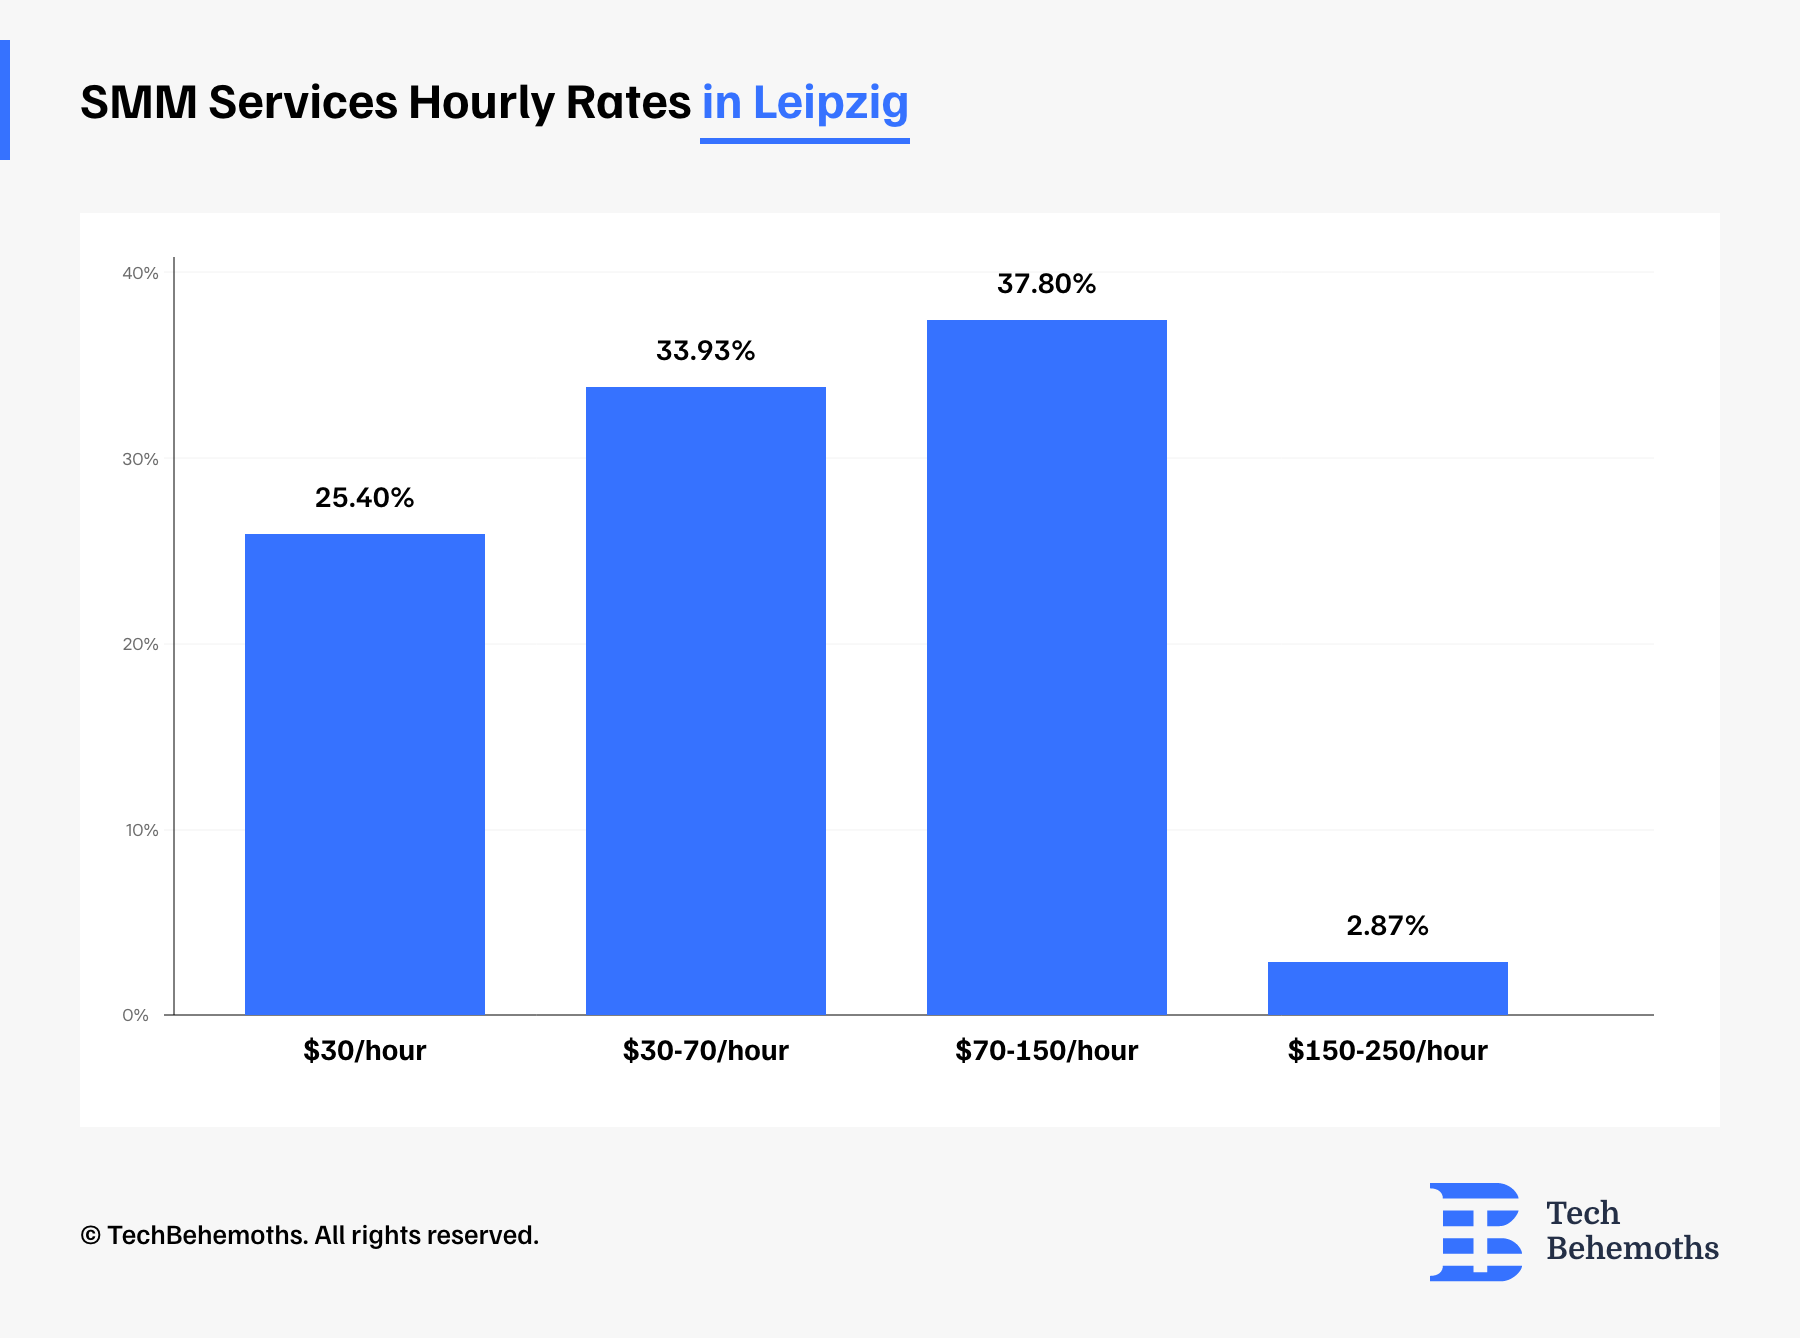 SMM services hourly rates in Leipzig, Germany, as of December 2023